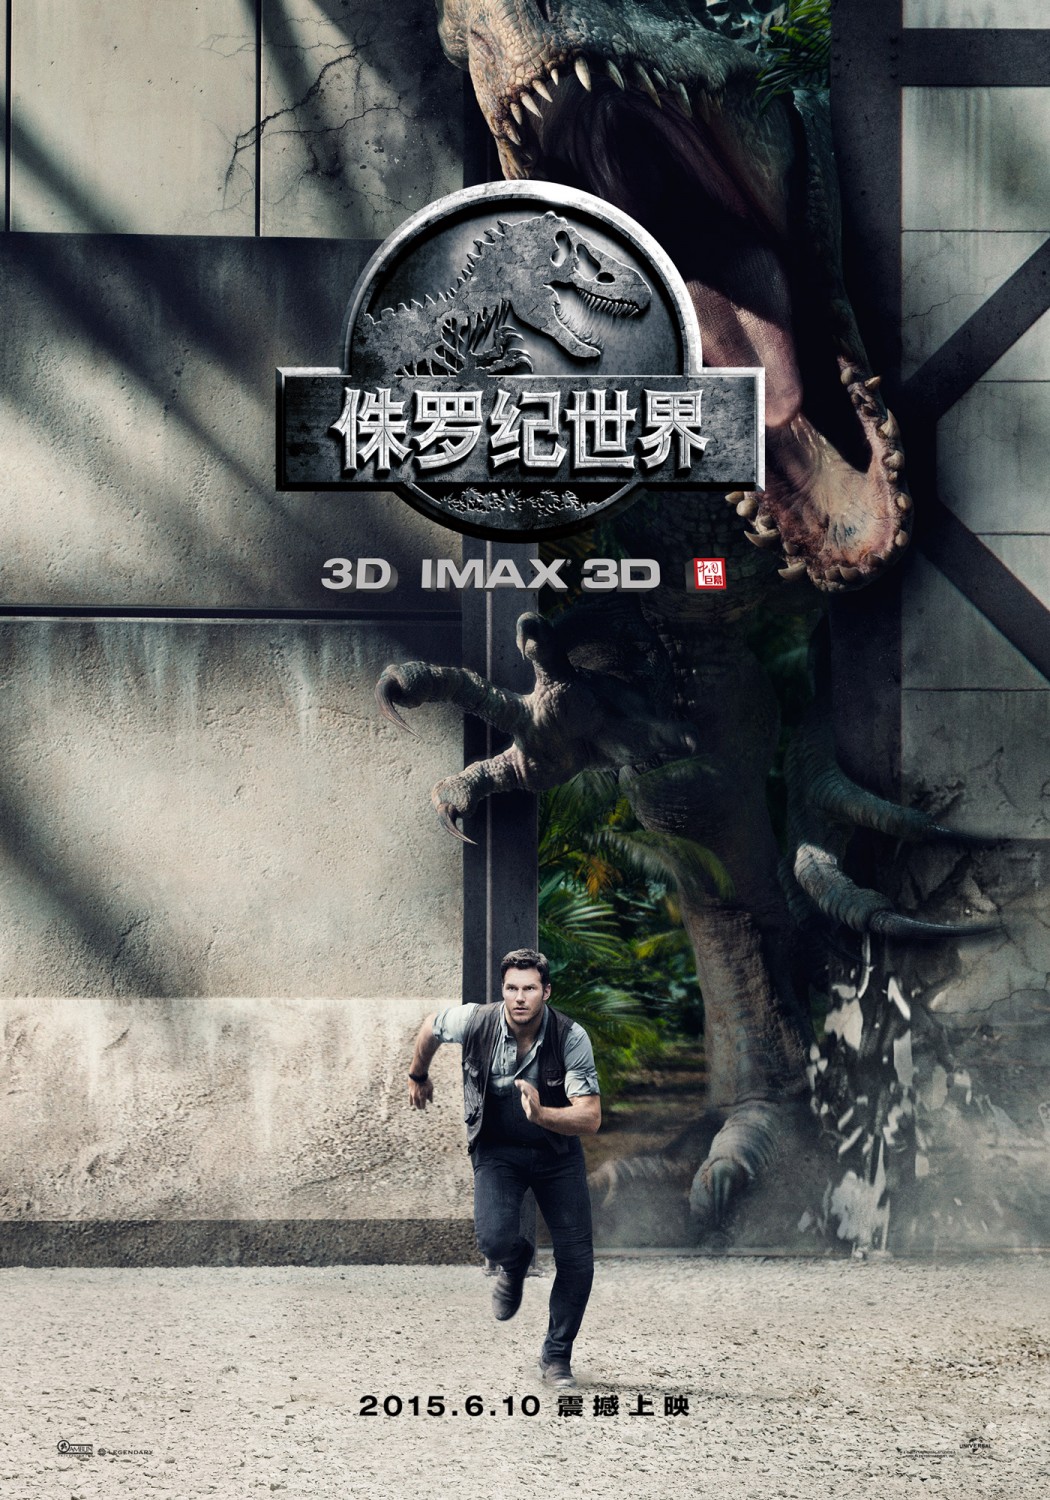 Extra Large Movie Poster Image for Jurassic World (#6 of 8)